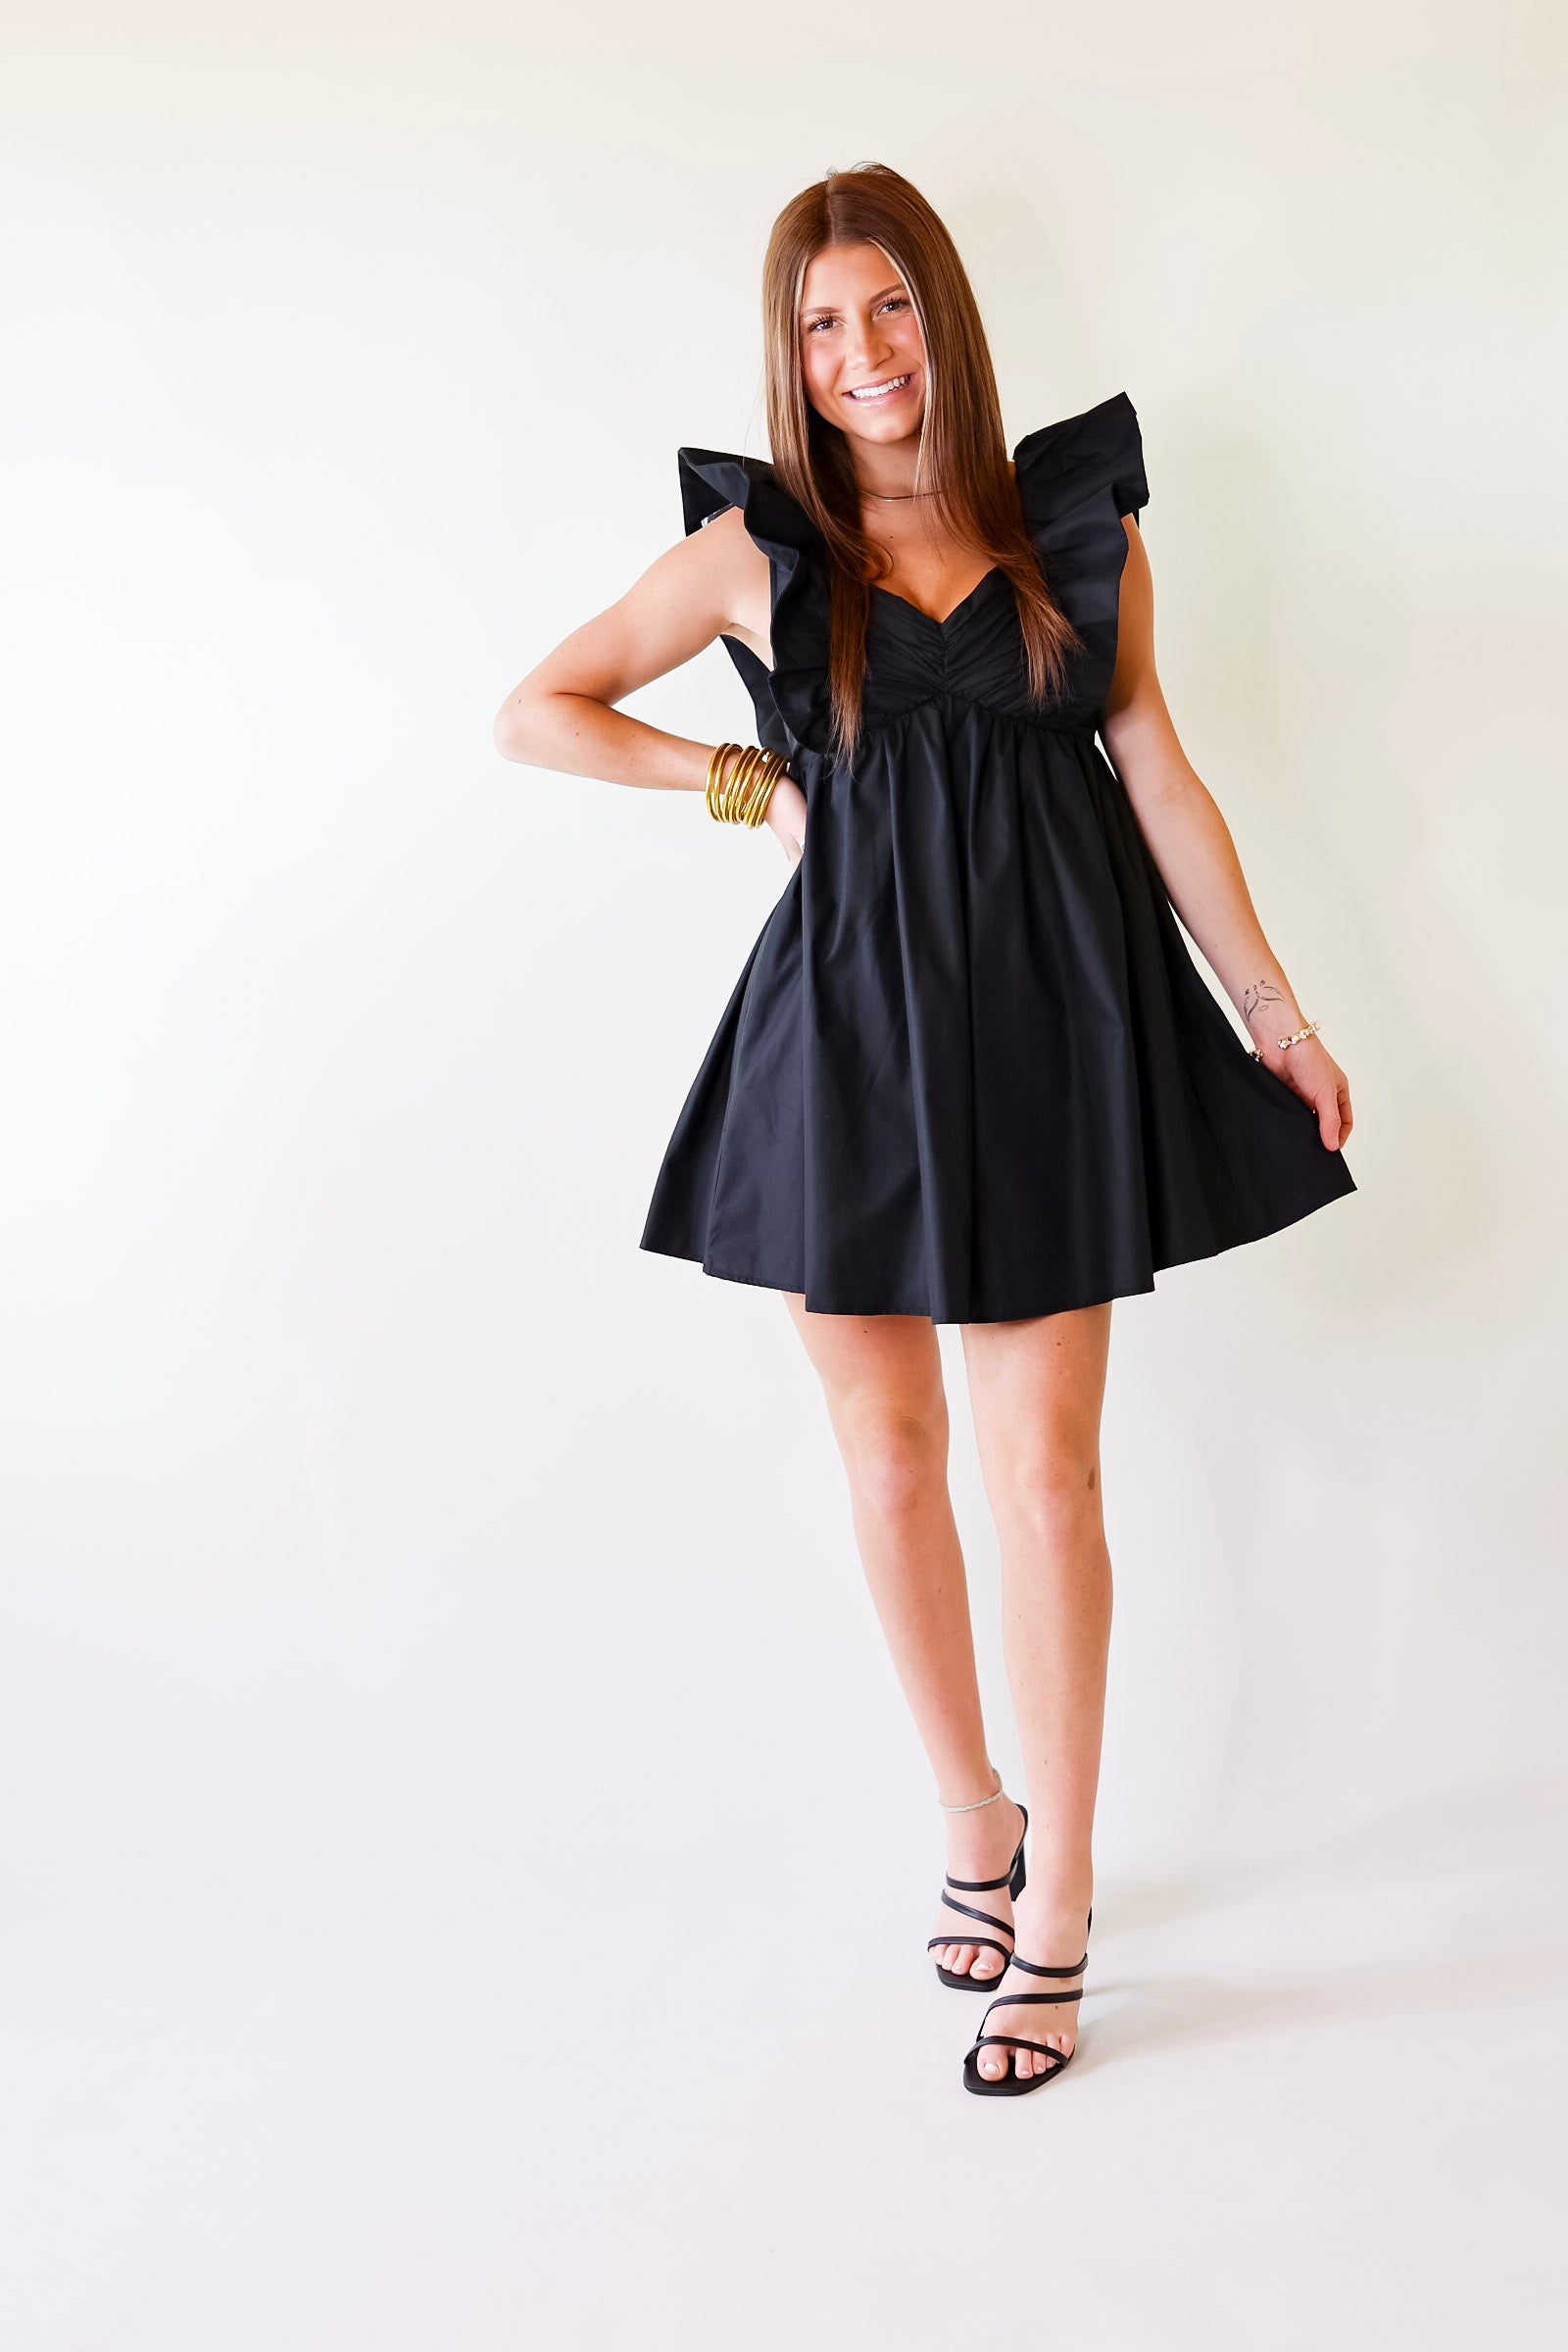 Pixie Perfect Ruffled Sleeve V Neck Dress in Black - Giddy Up Glamour Boutique